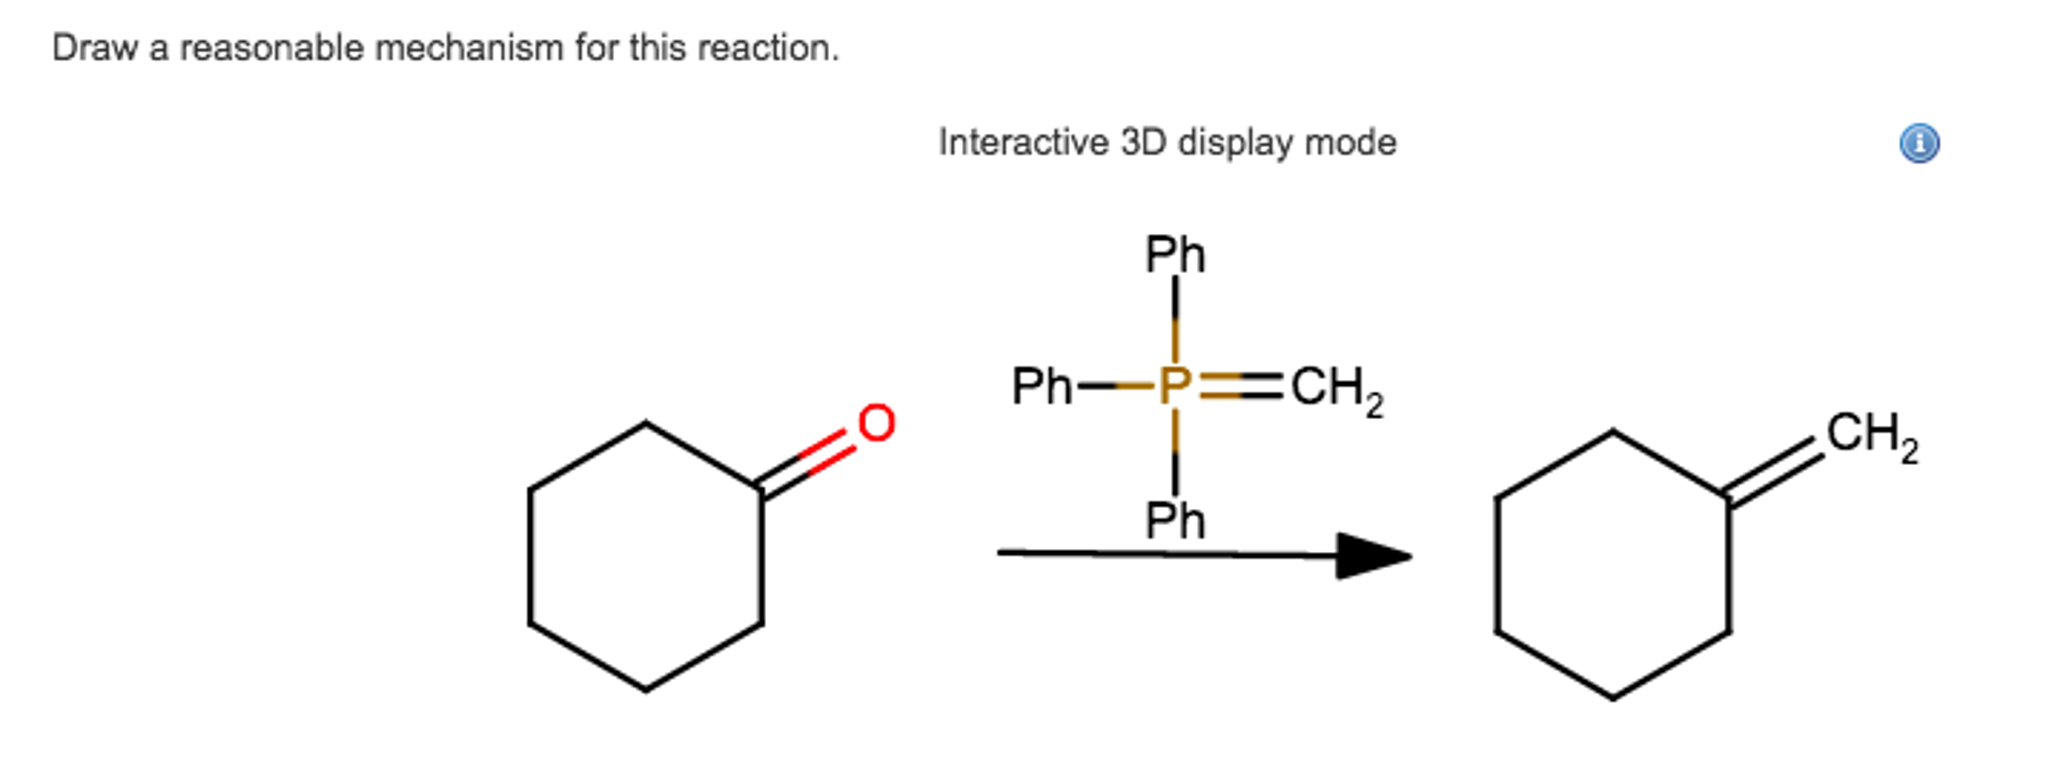 Solved Draw a reasonable mechanism for this reaction.